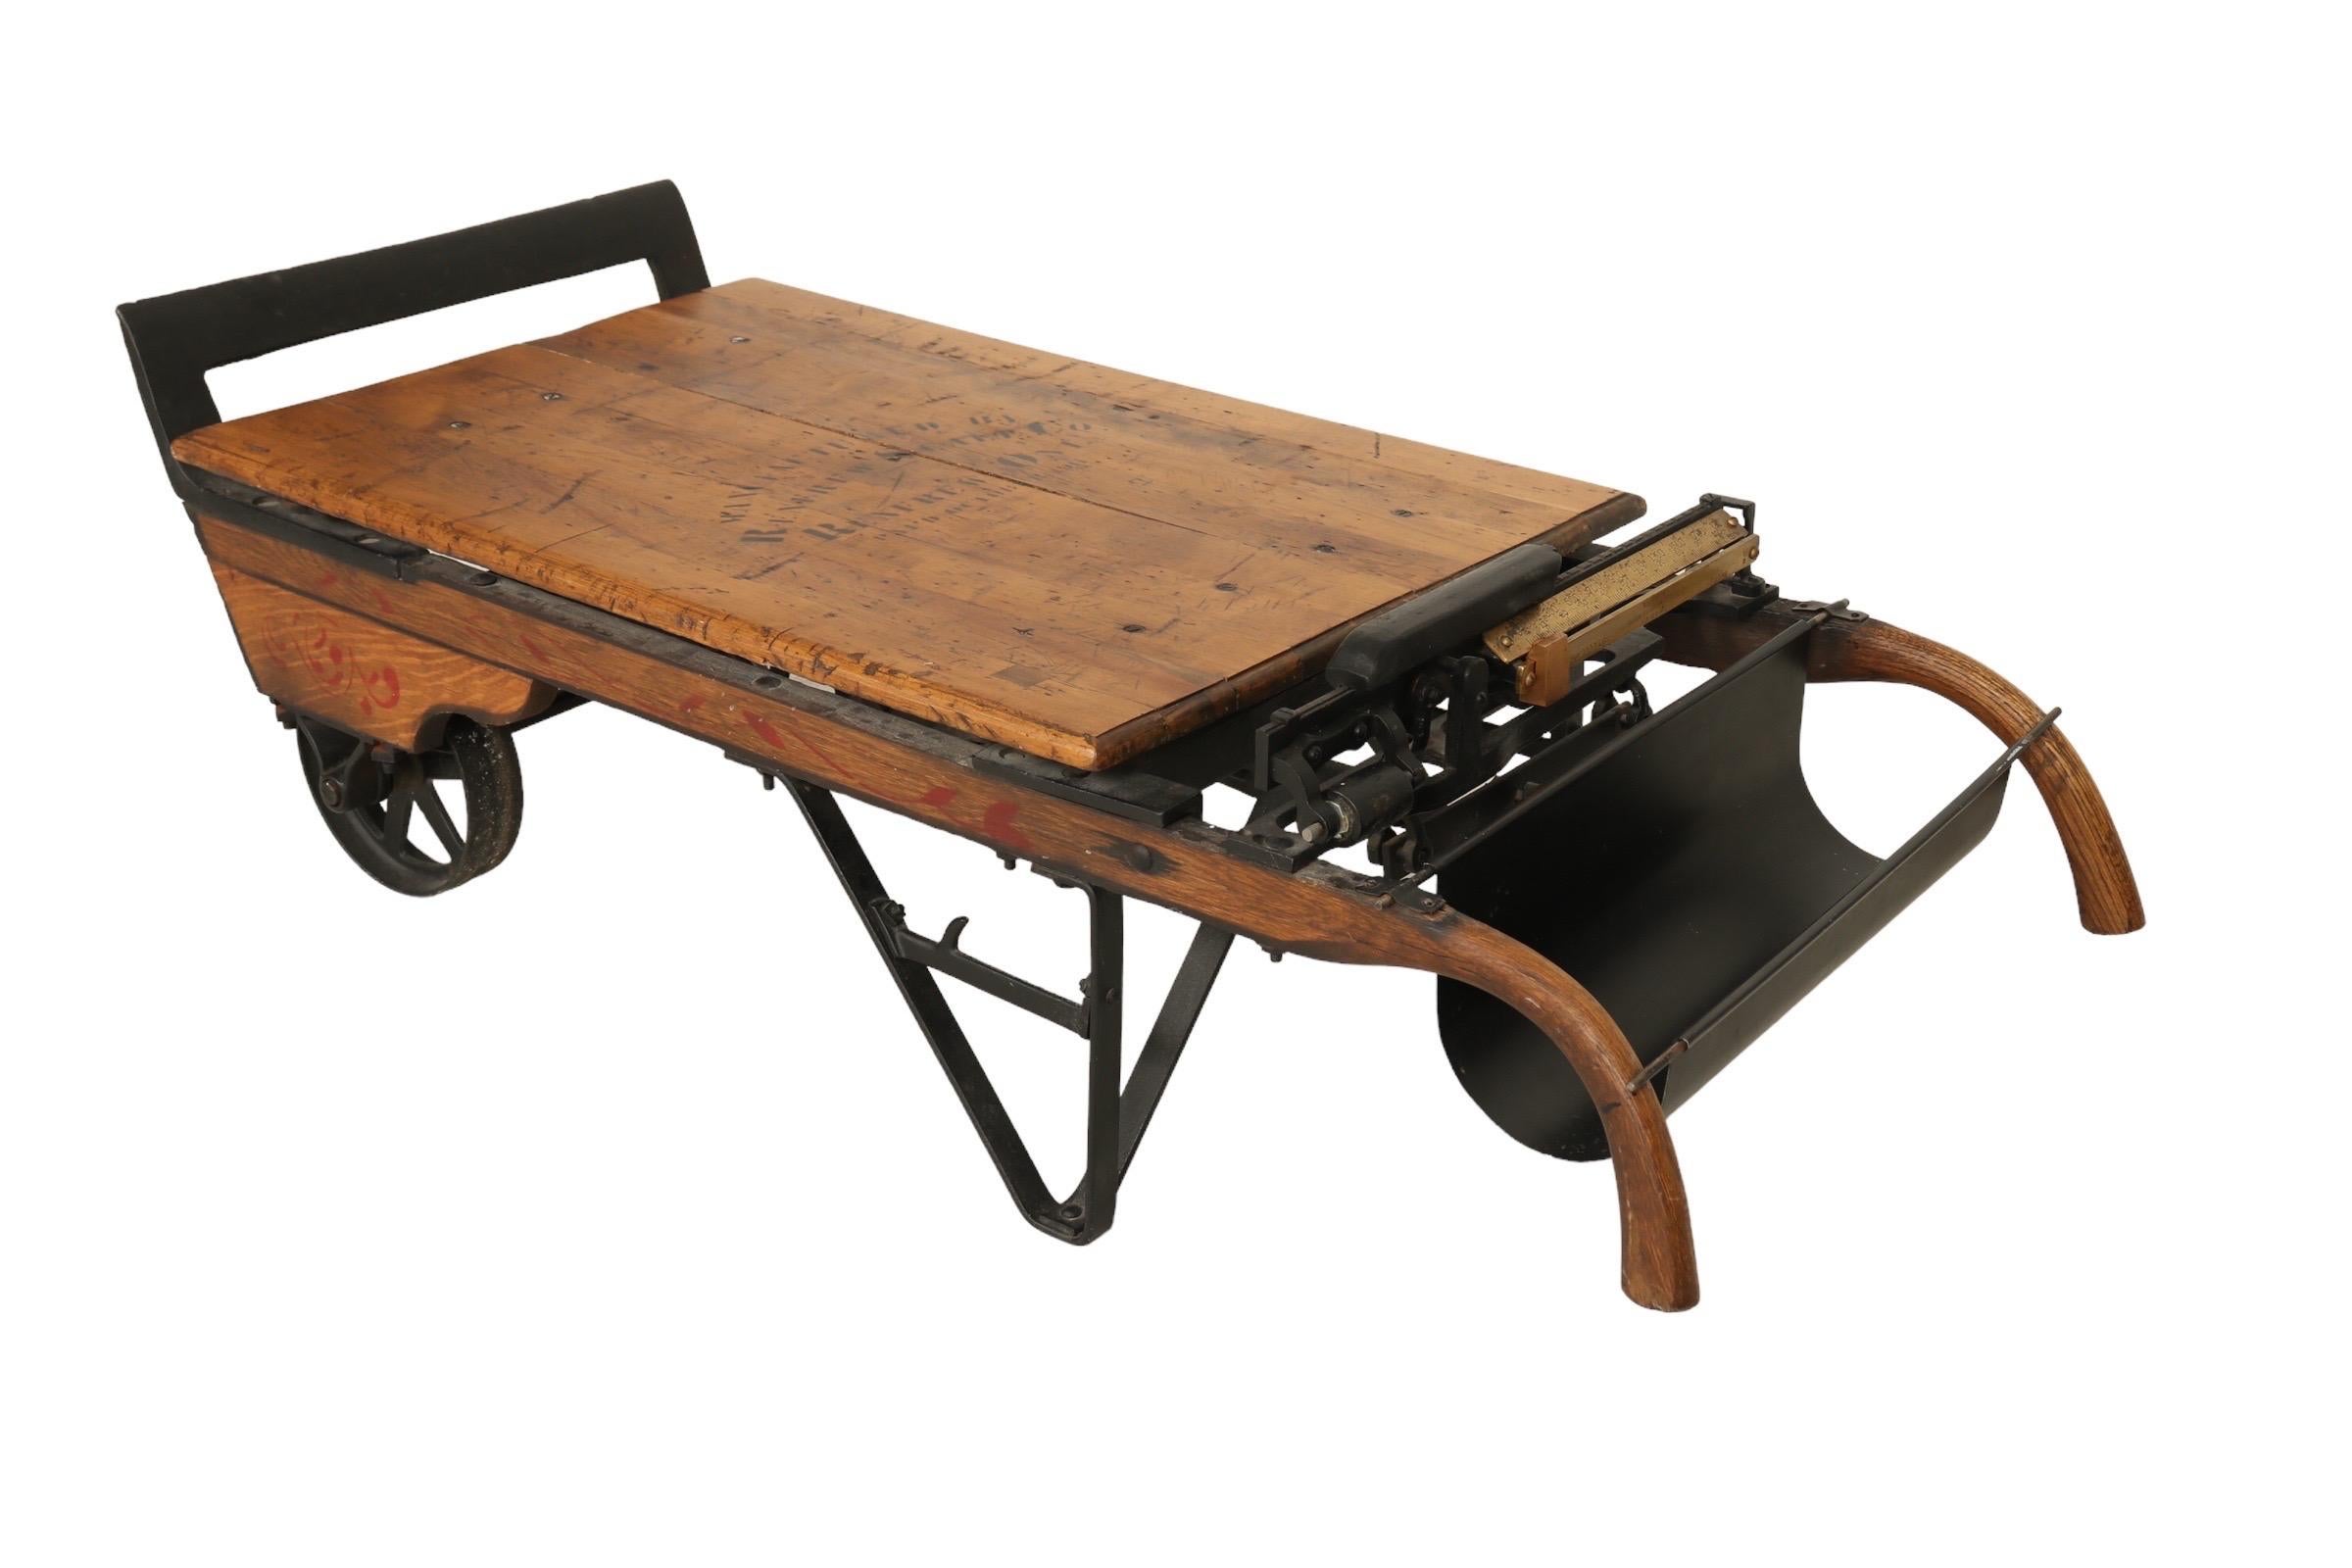 An industrial dolly and grain scale coffee table patented in 1911 and manufactured by Renfrew Scale Co. of Ontario, Canada as stamped on the tabletop. The handles and beveled edge tabletop are made of oak. The weighing scale measure is brass and the